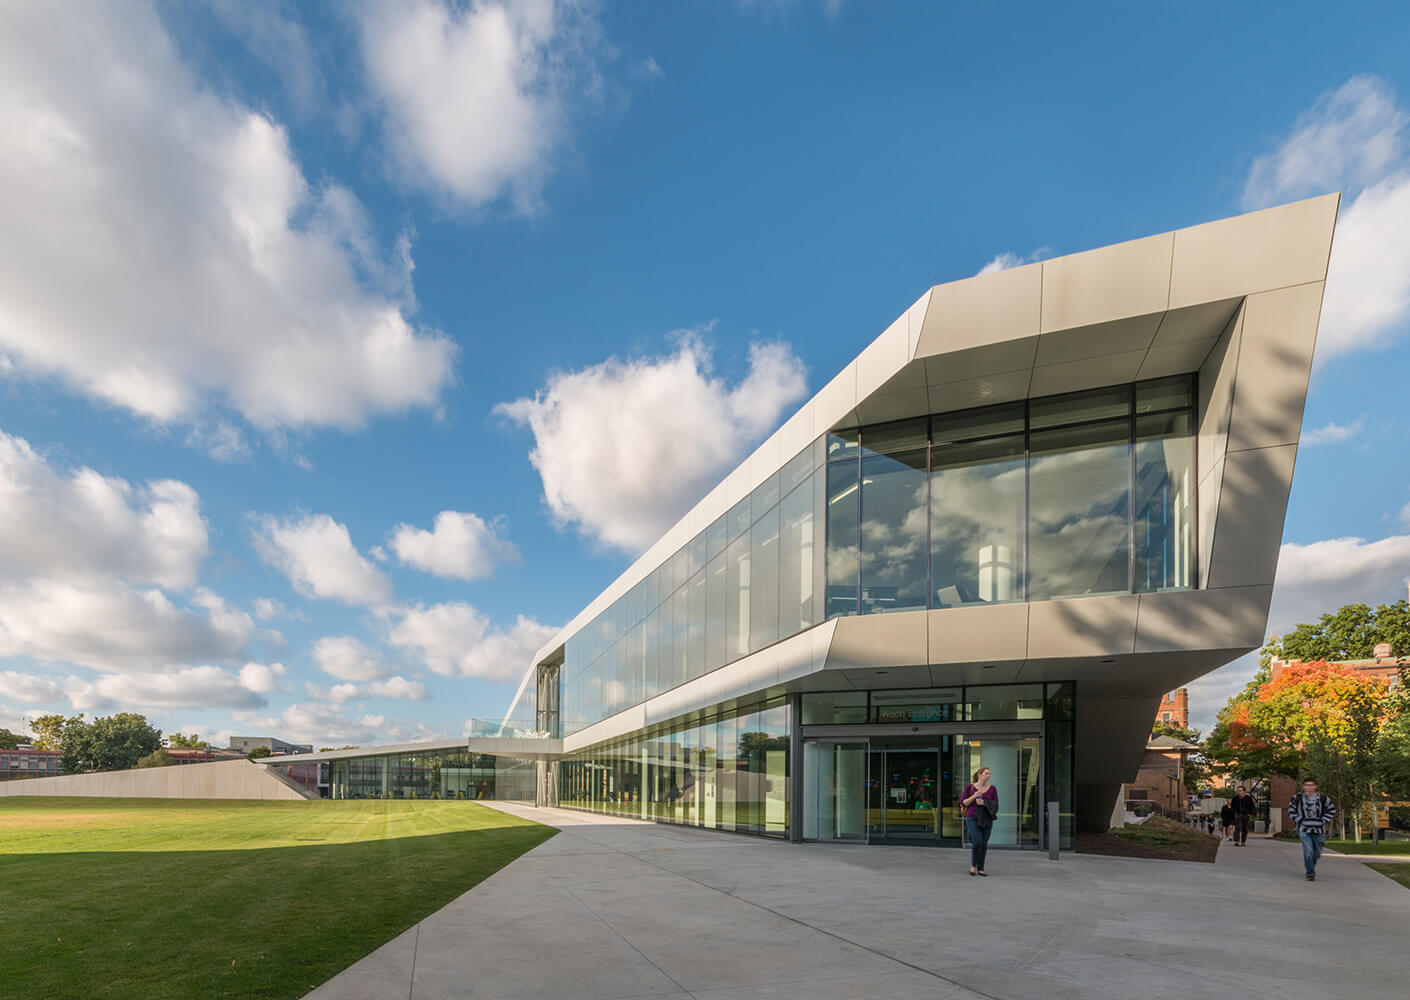 Perspective view of Tinkham Veale University Center building and landscape